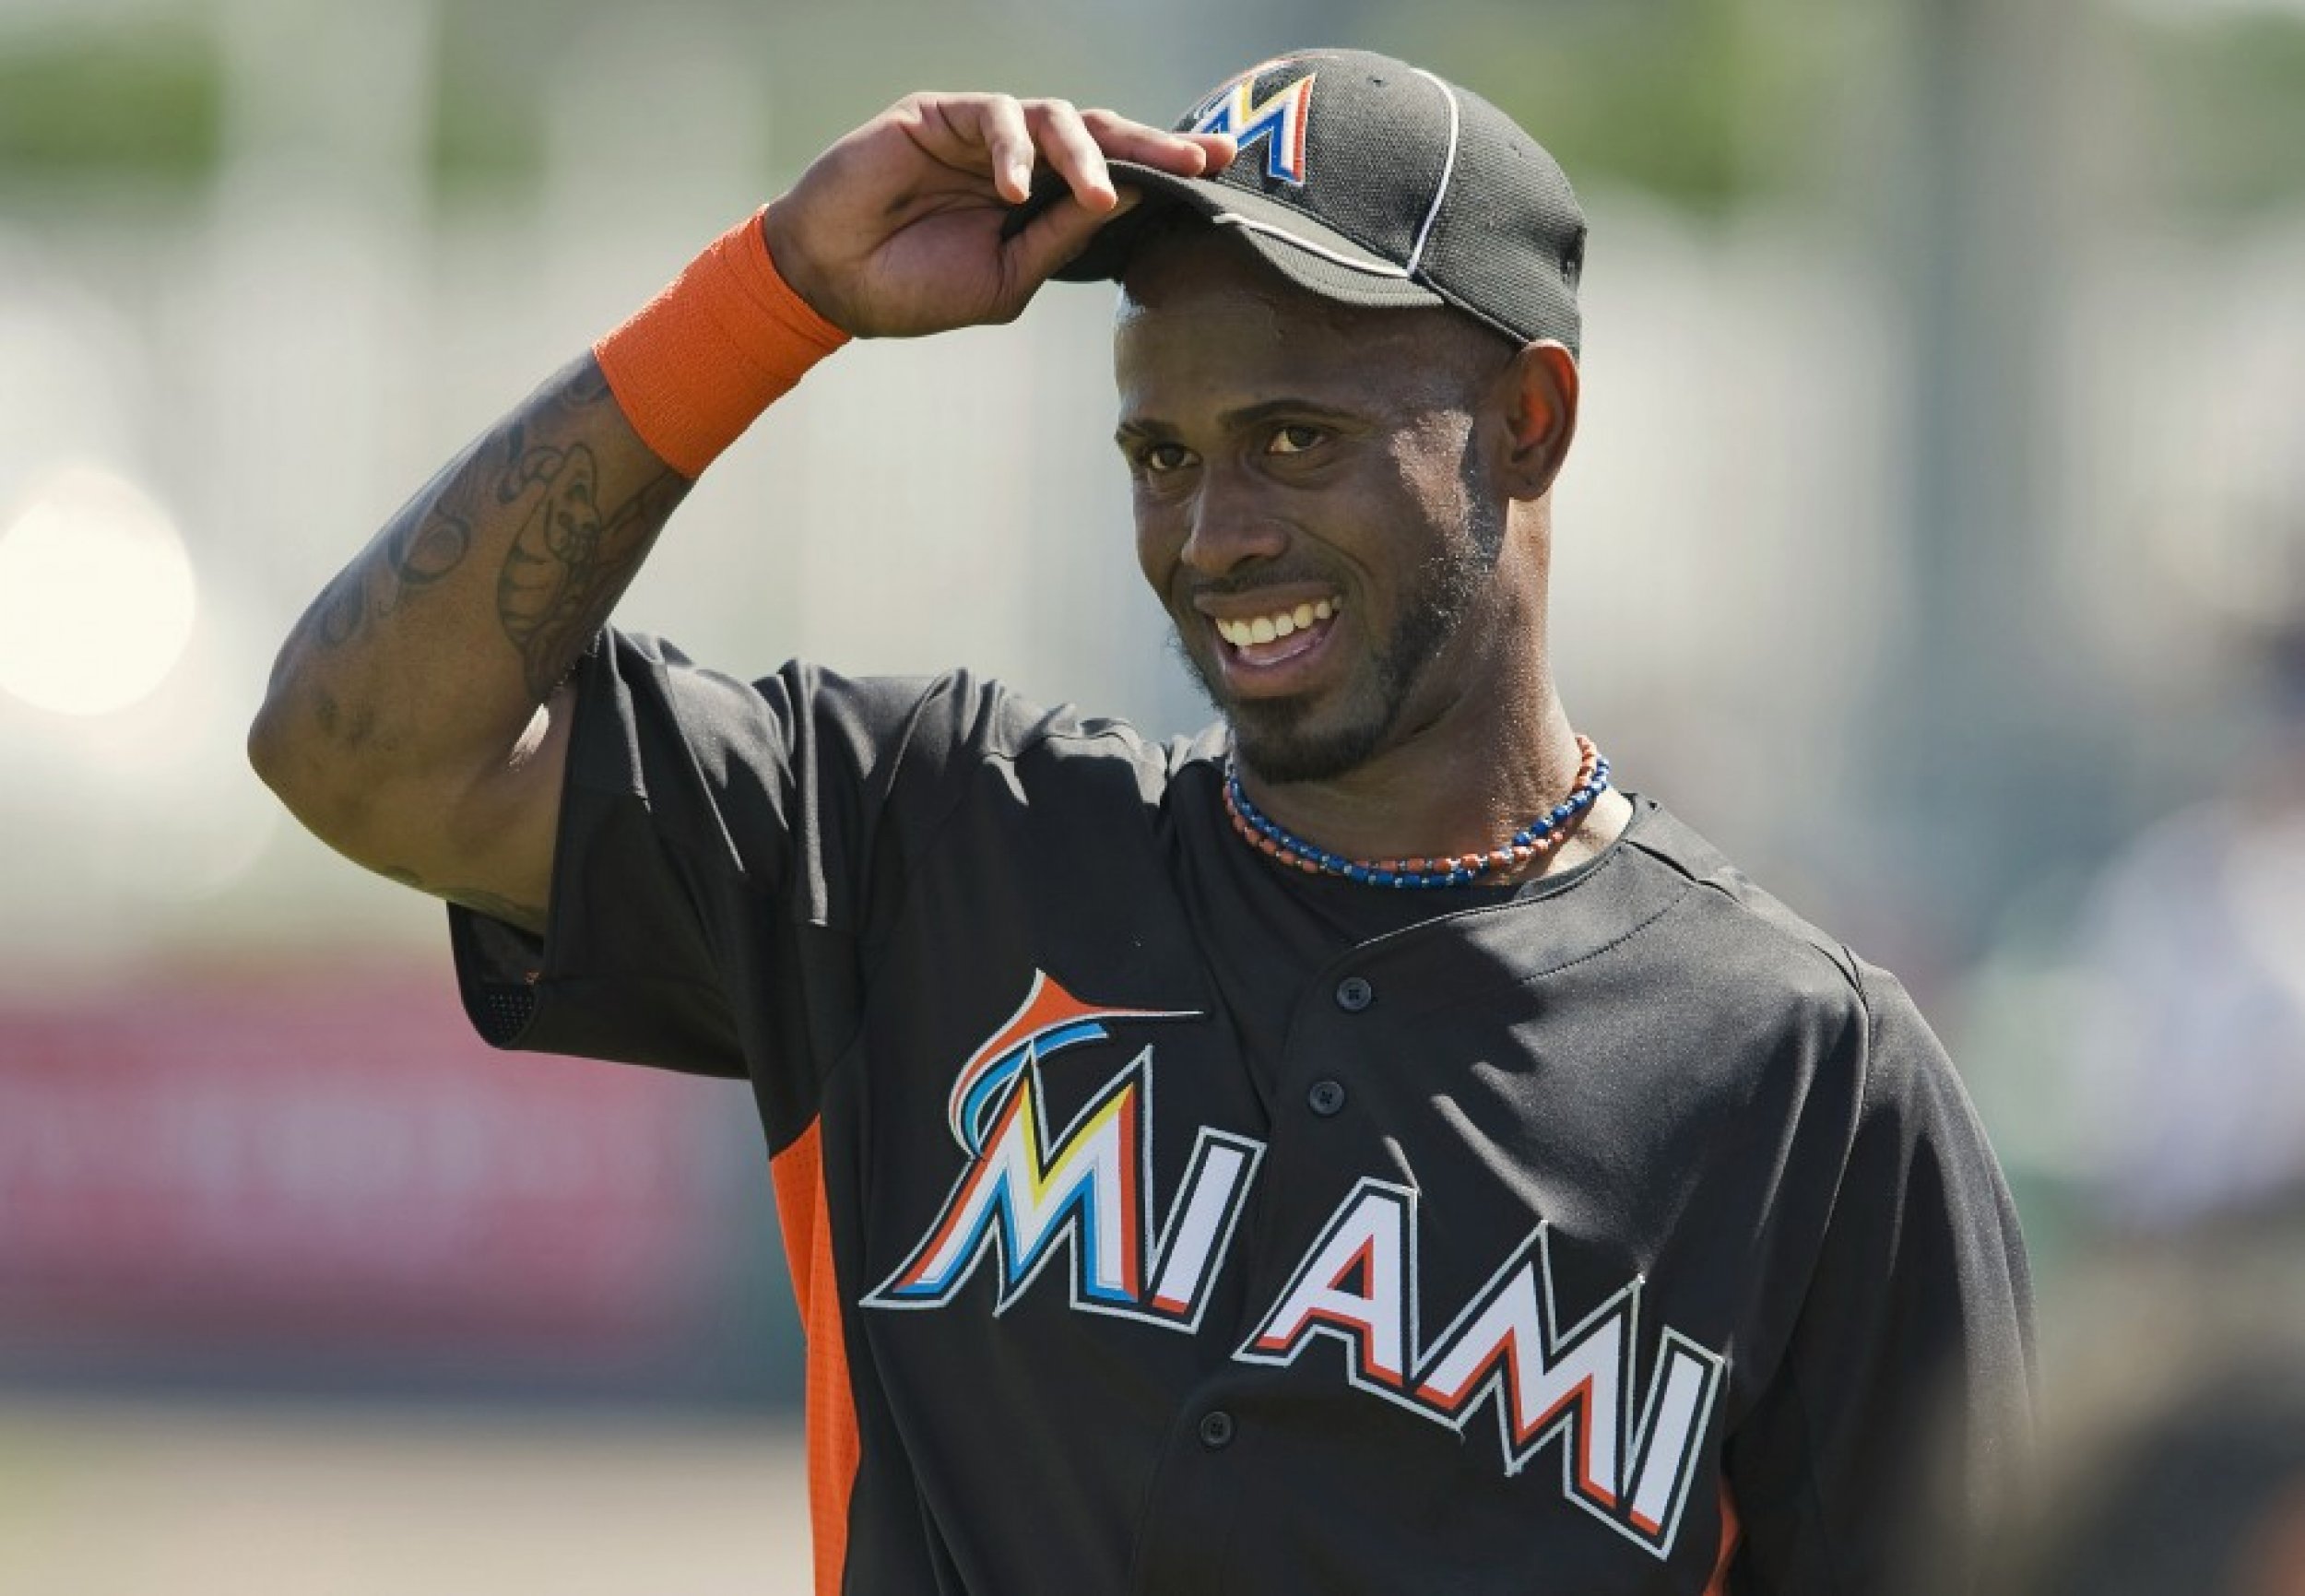 Marlins owner told Reyes to buy house in Miami days before trade